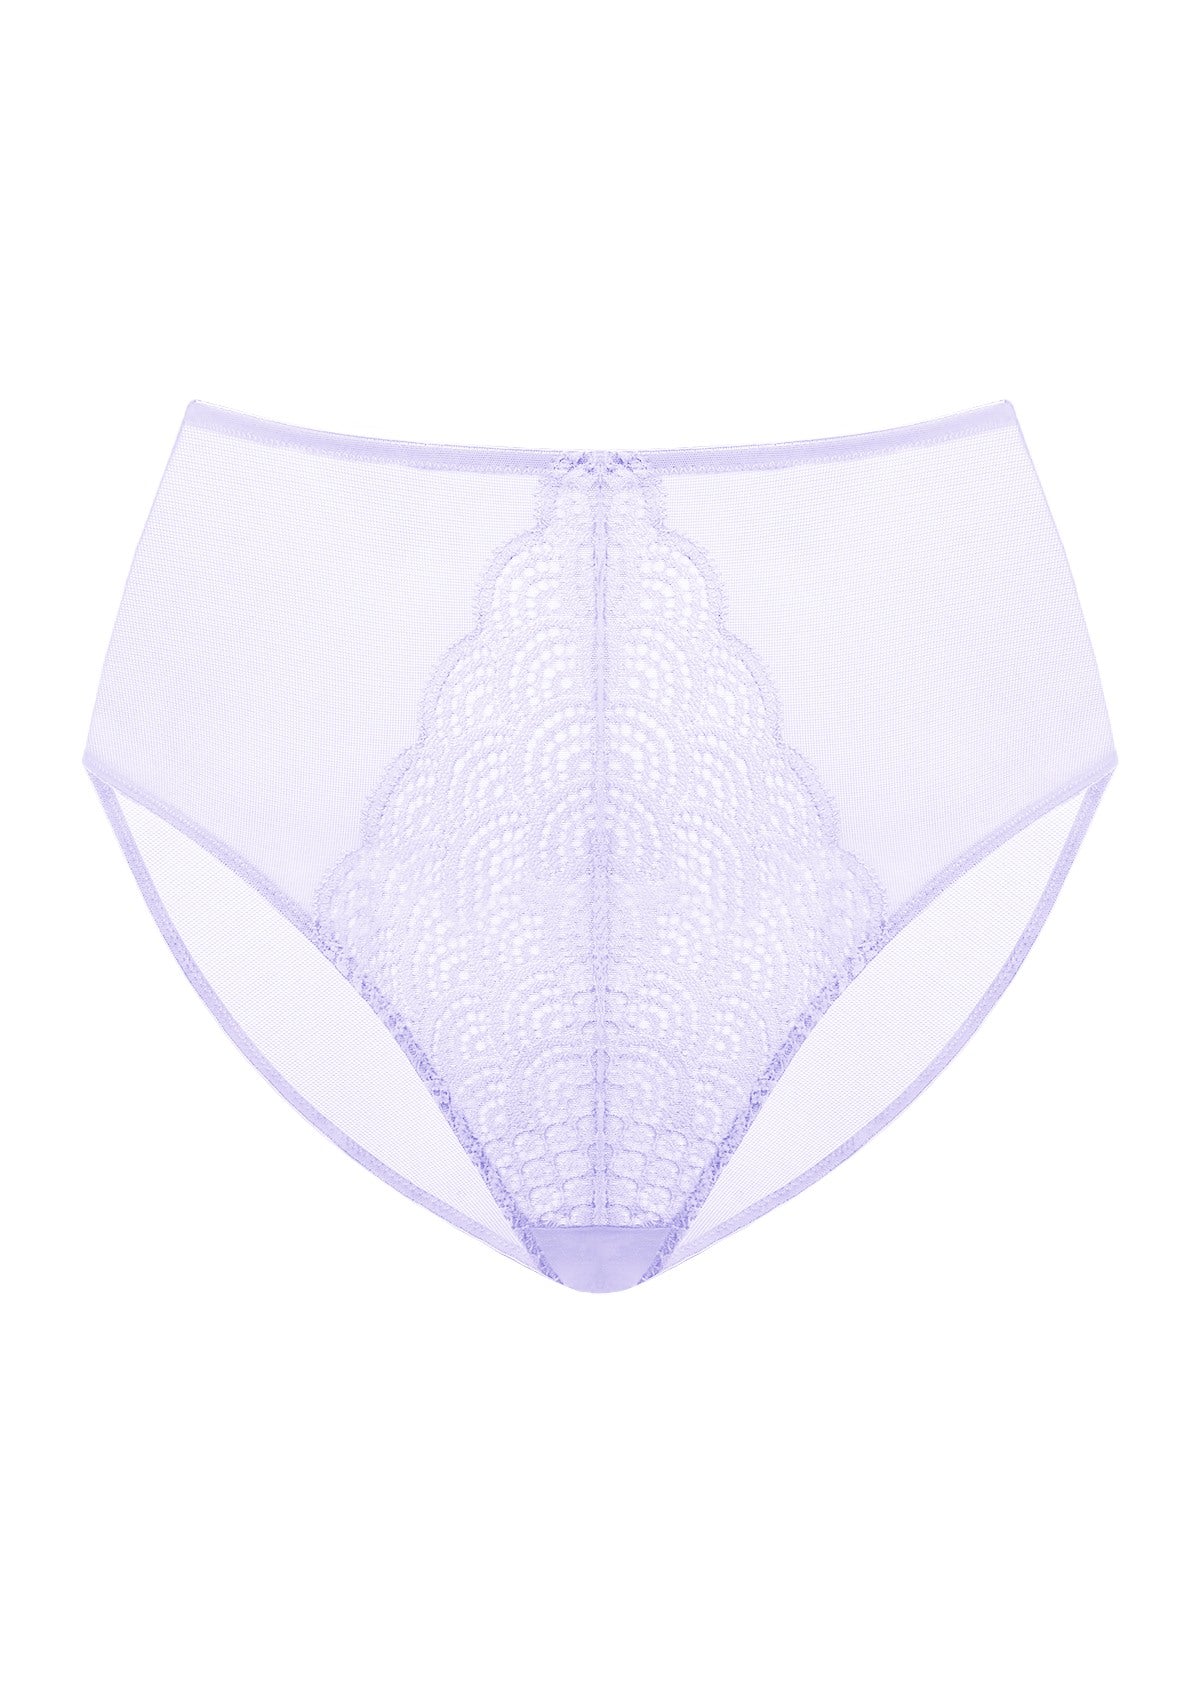 HSIA Spring Romance High-Rise Floral Lacy Panty-Comfort In Style - L / Light Purple